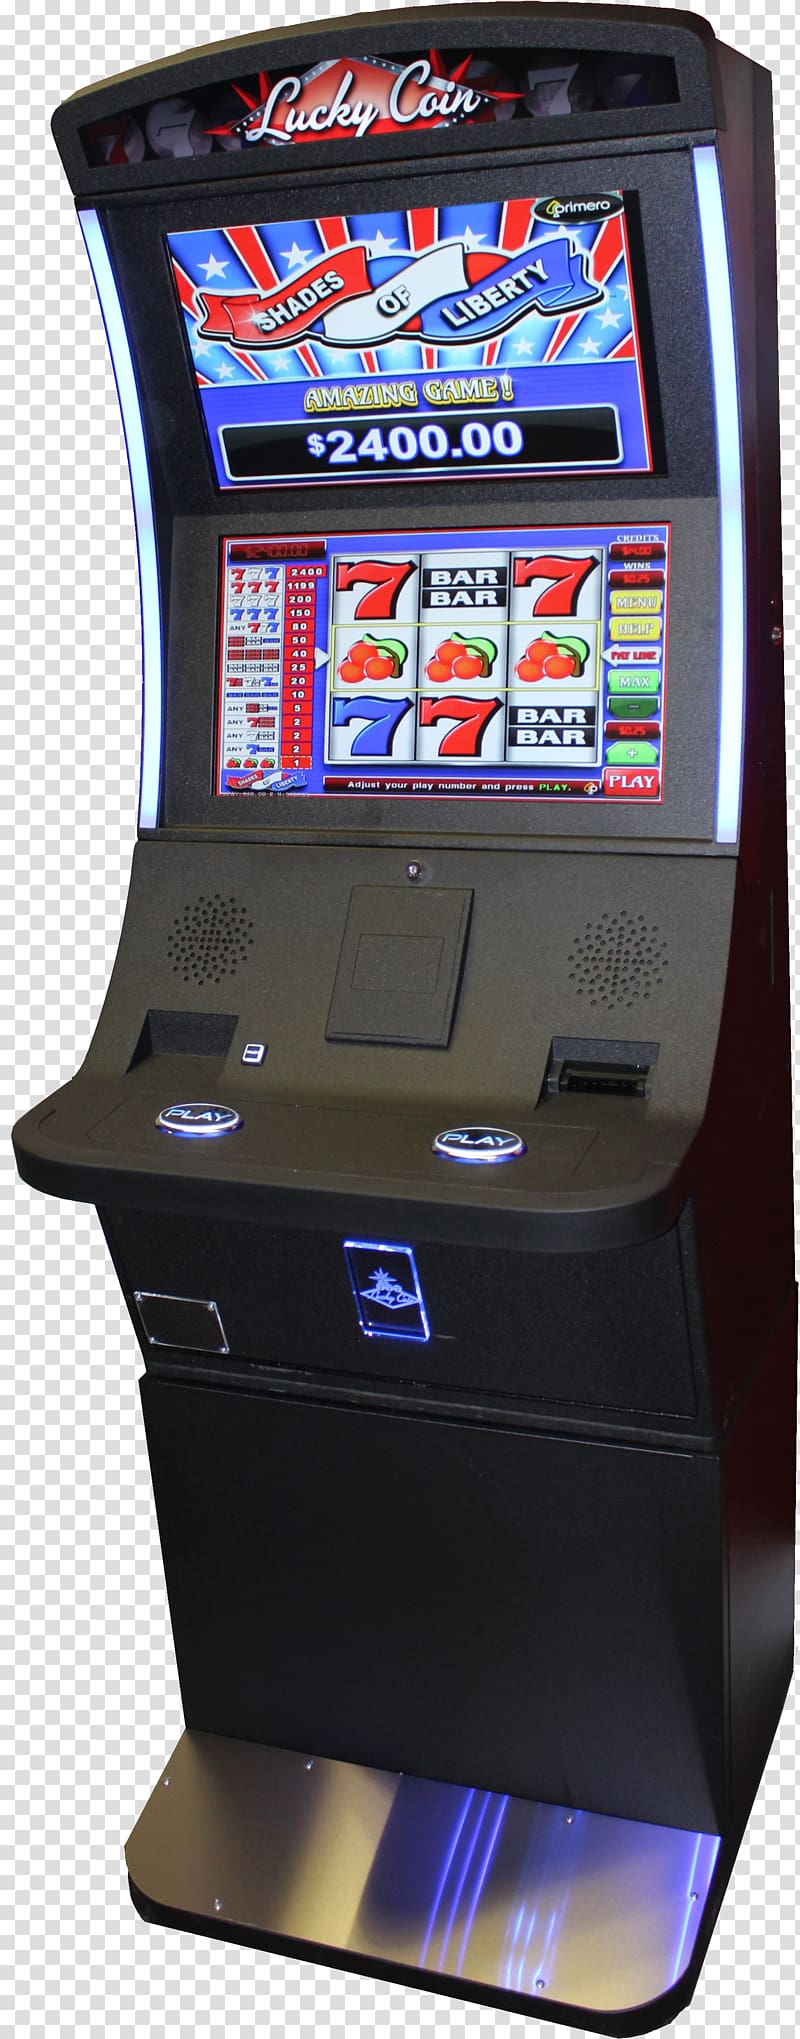 Arcade cabinet Arcade game Amusement arcade Video game, Georgia Lottery transparent background PNG clipart